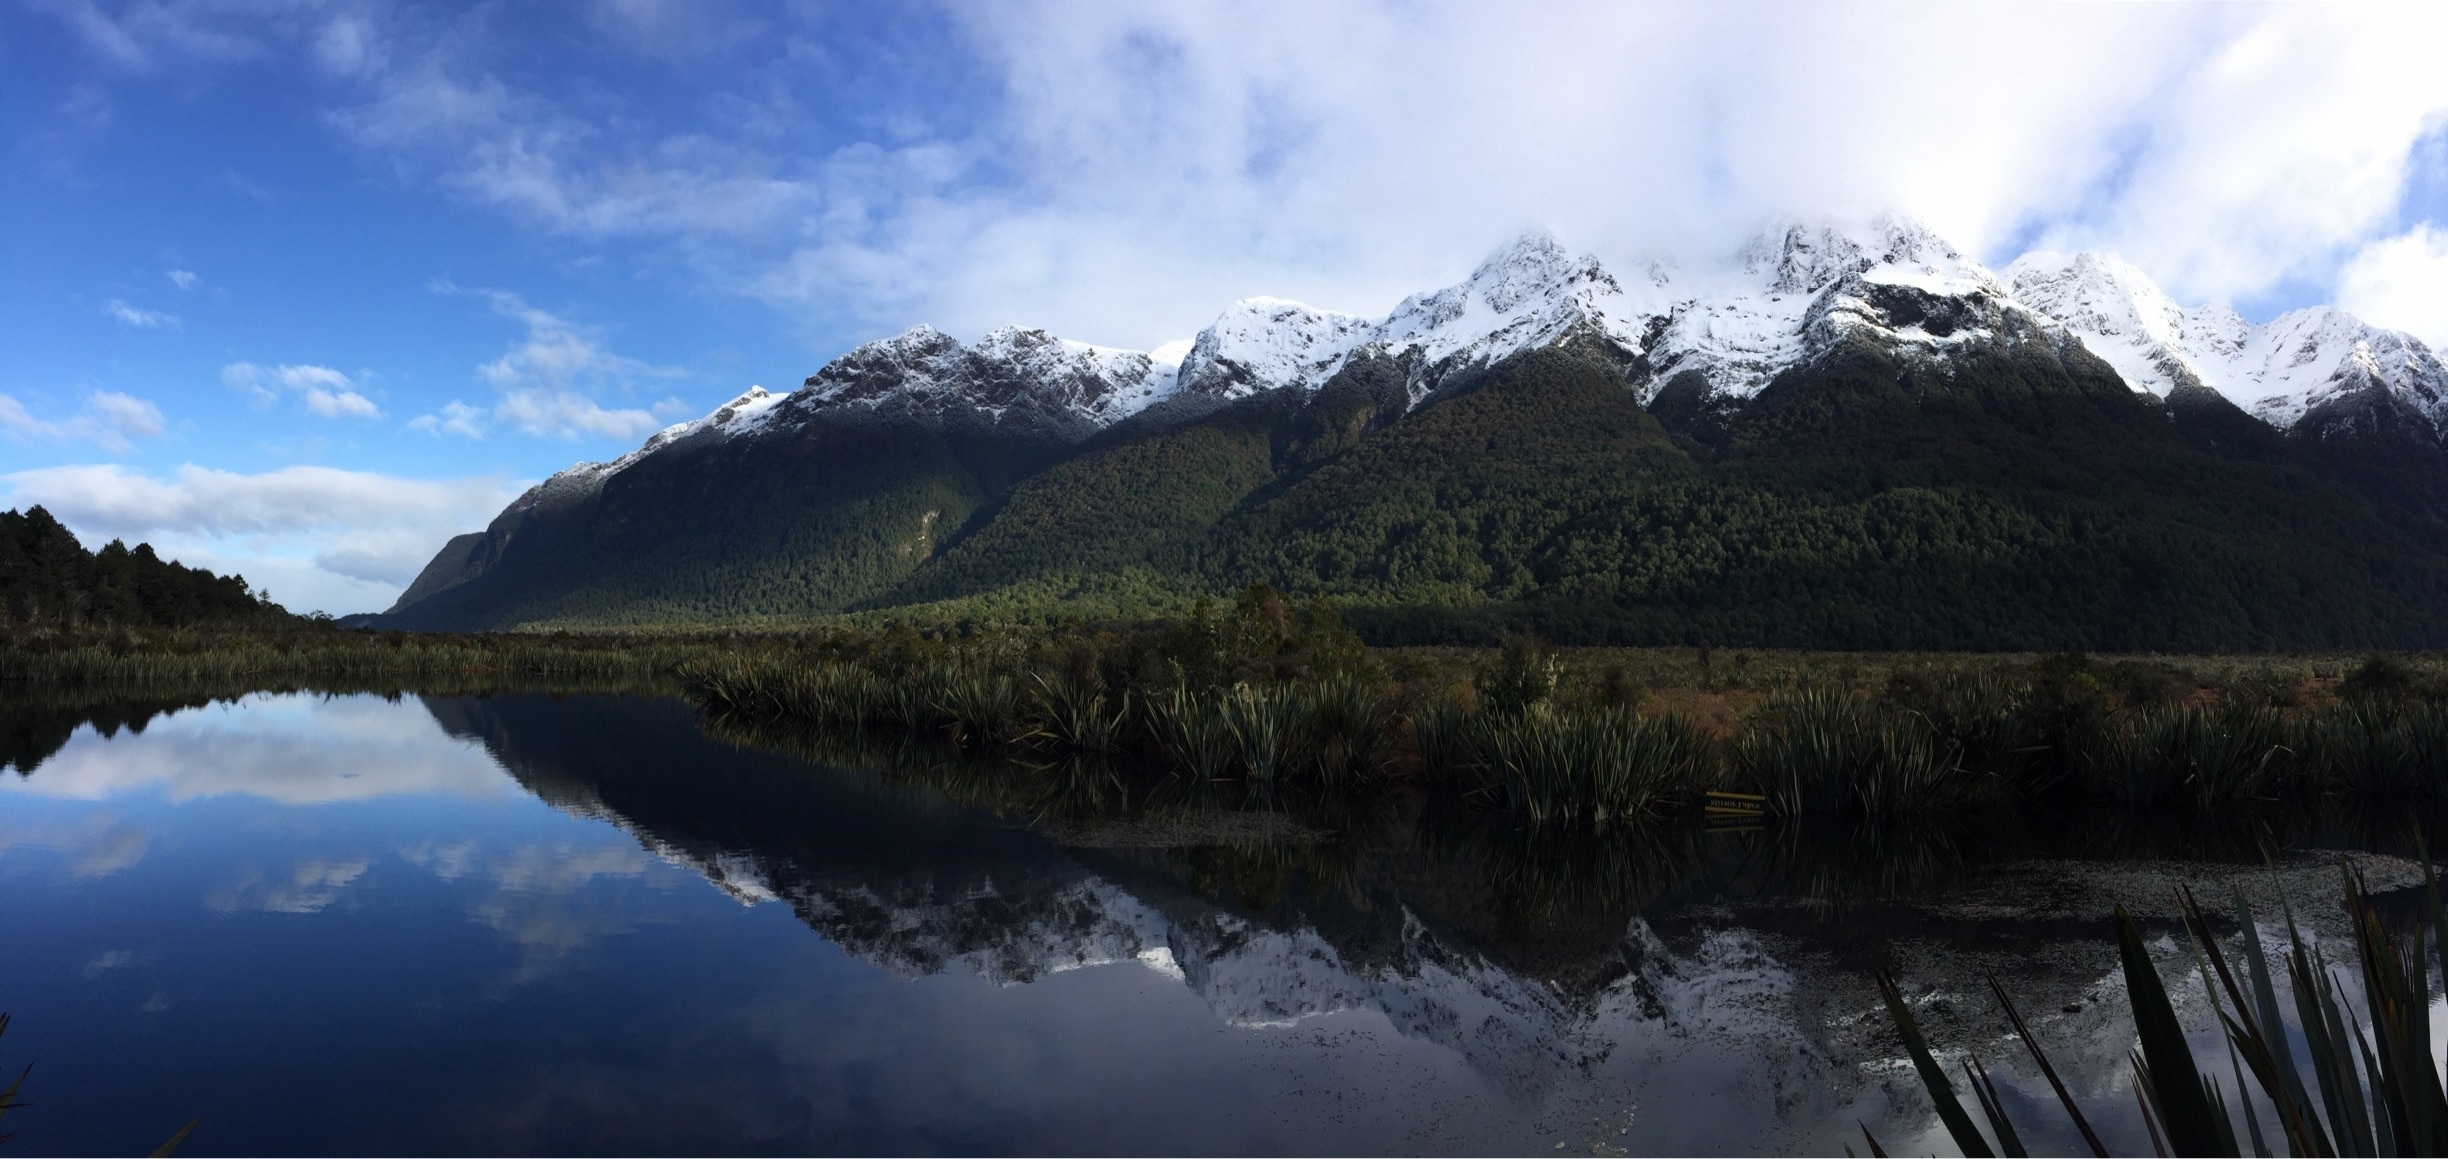 The road to Milford Sound is amazing. 